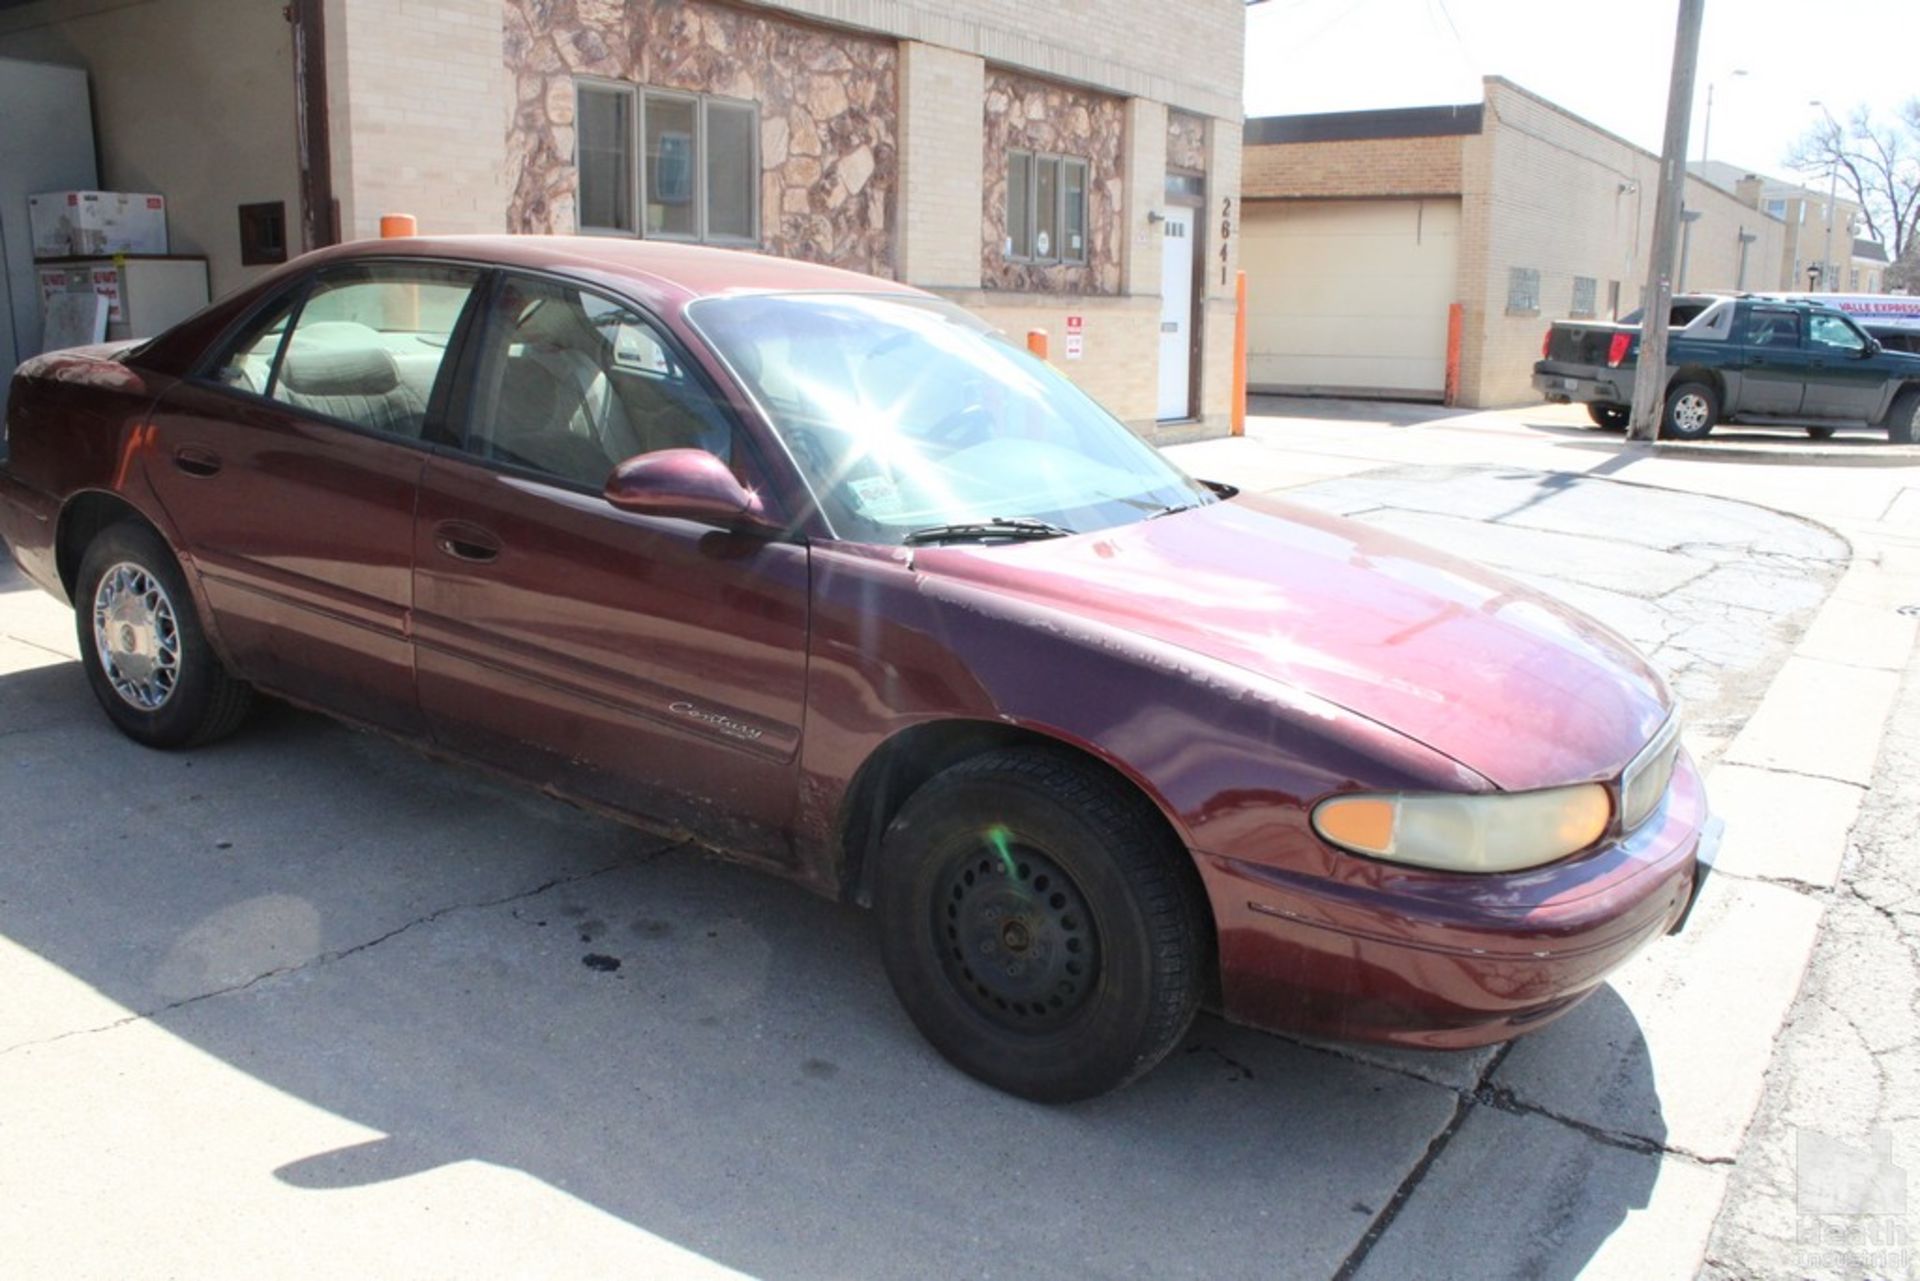 2001 BUICK MODEL CENTURY AUTOMOBILE, VIN: 2G4AS52J511184800, AUTOMATIC TRANSMISSION, CAN'T READ - Image 2 of 7